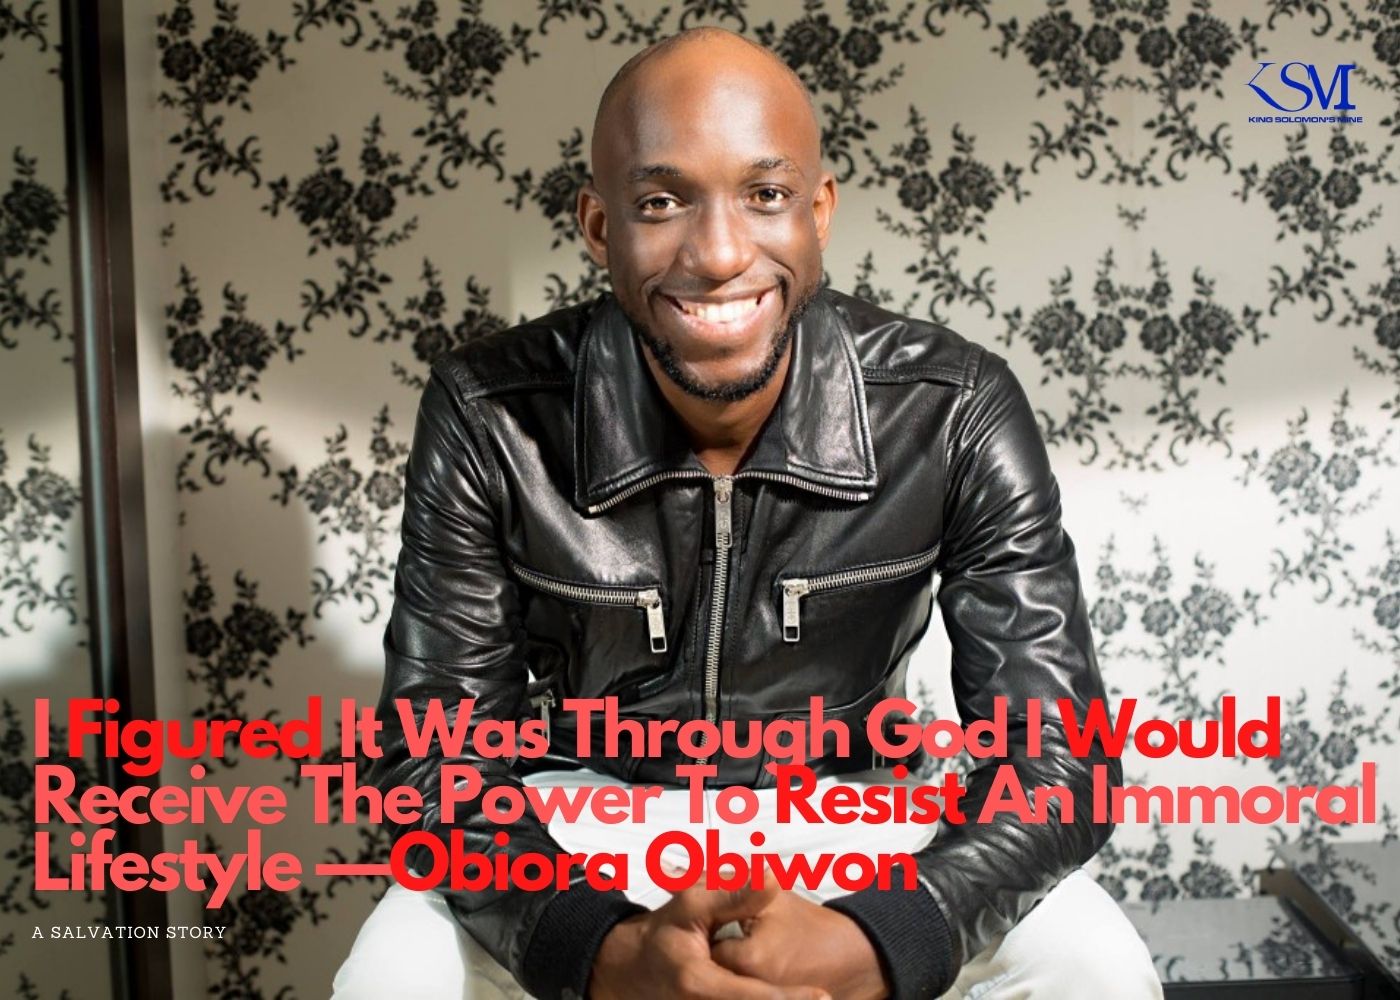 I Figured It Was Through God I Would Receive The Power To Resist An Immoral Lifestyle â€”Obiora Obiwon